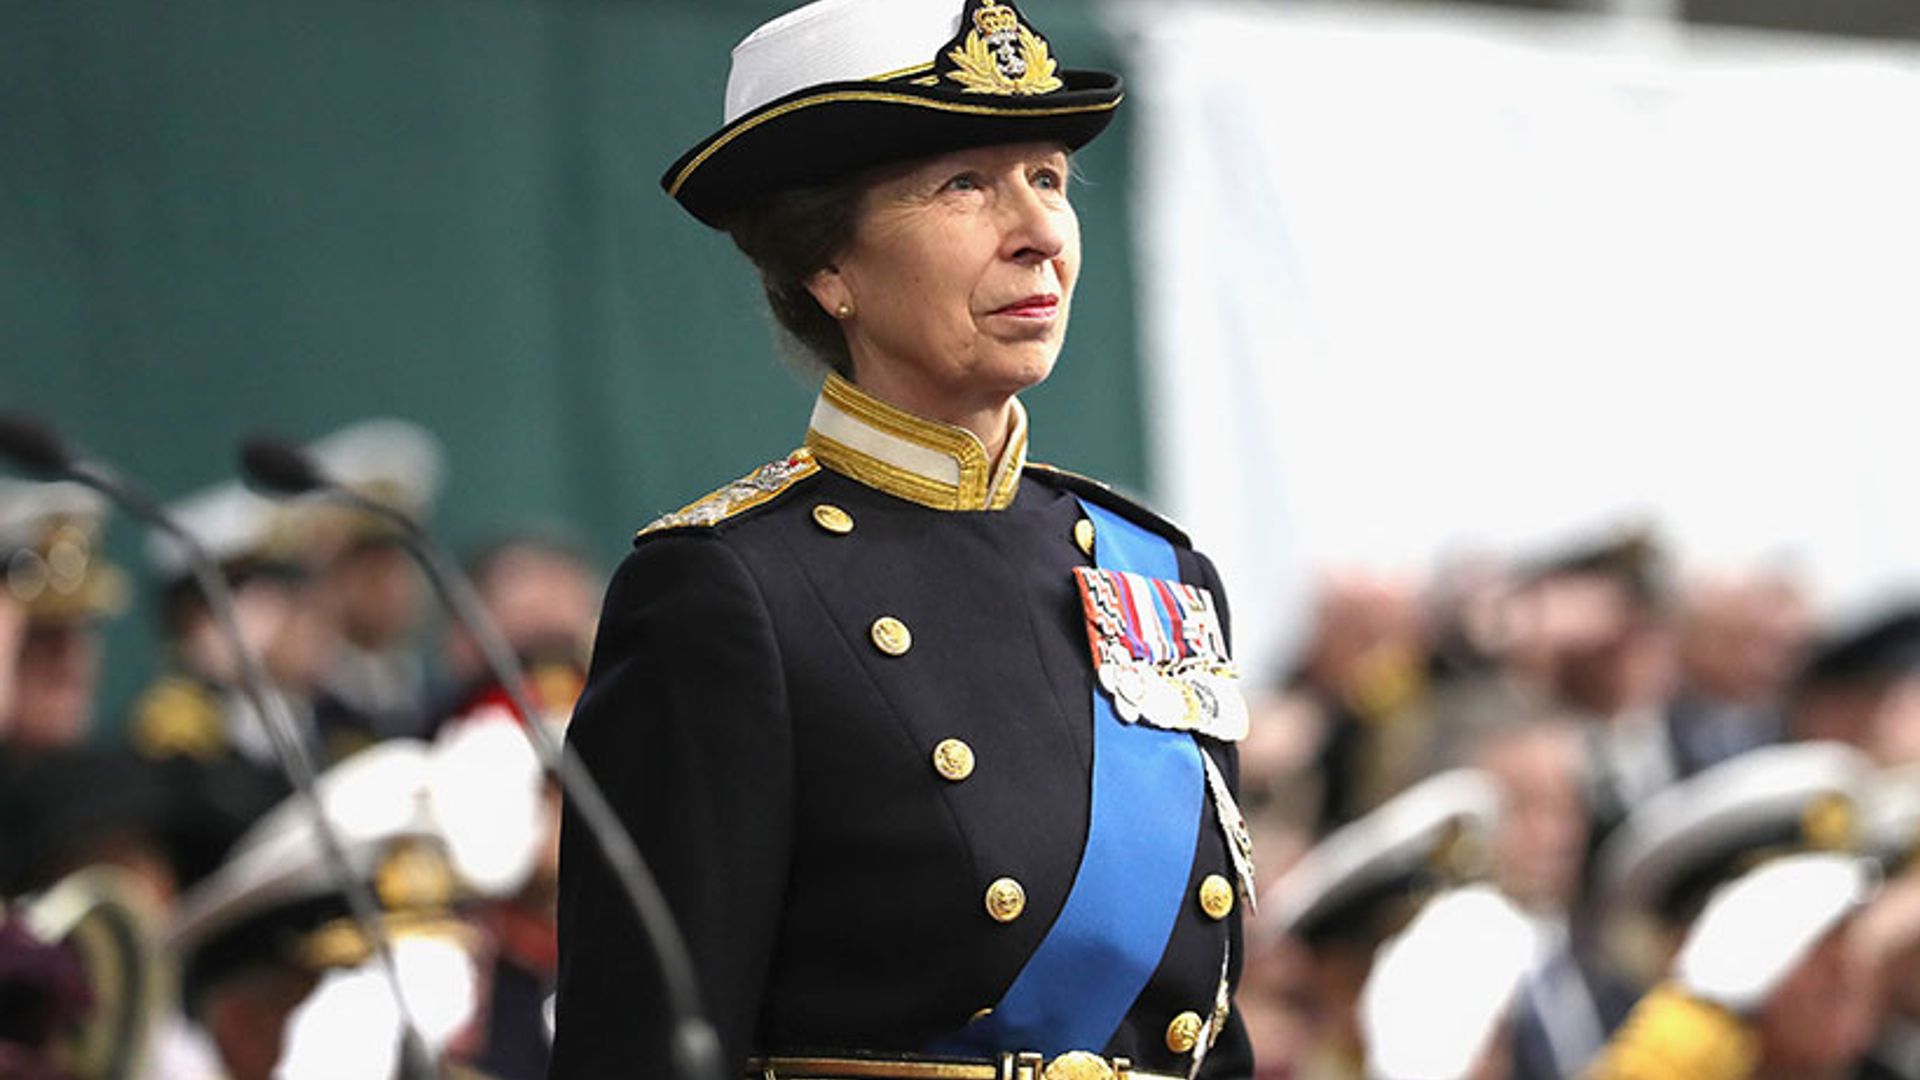 Queen of official duties! Princess Anne just flew to Toronto and was back on the same day